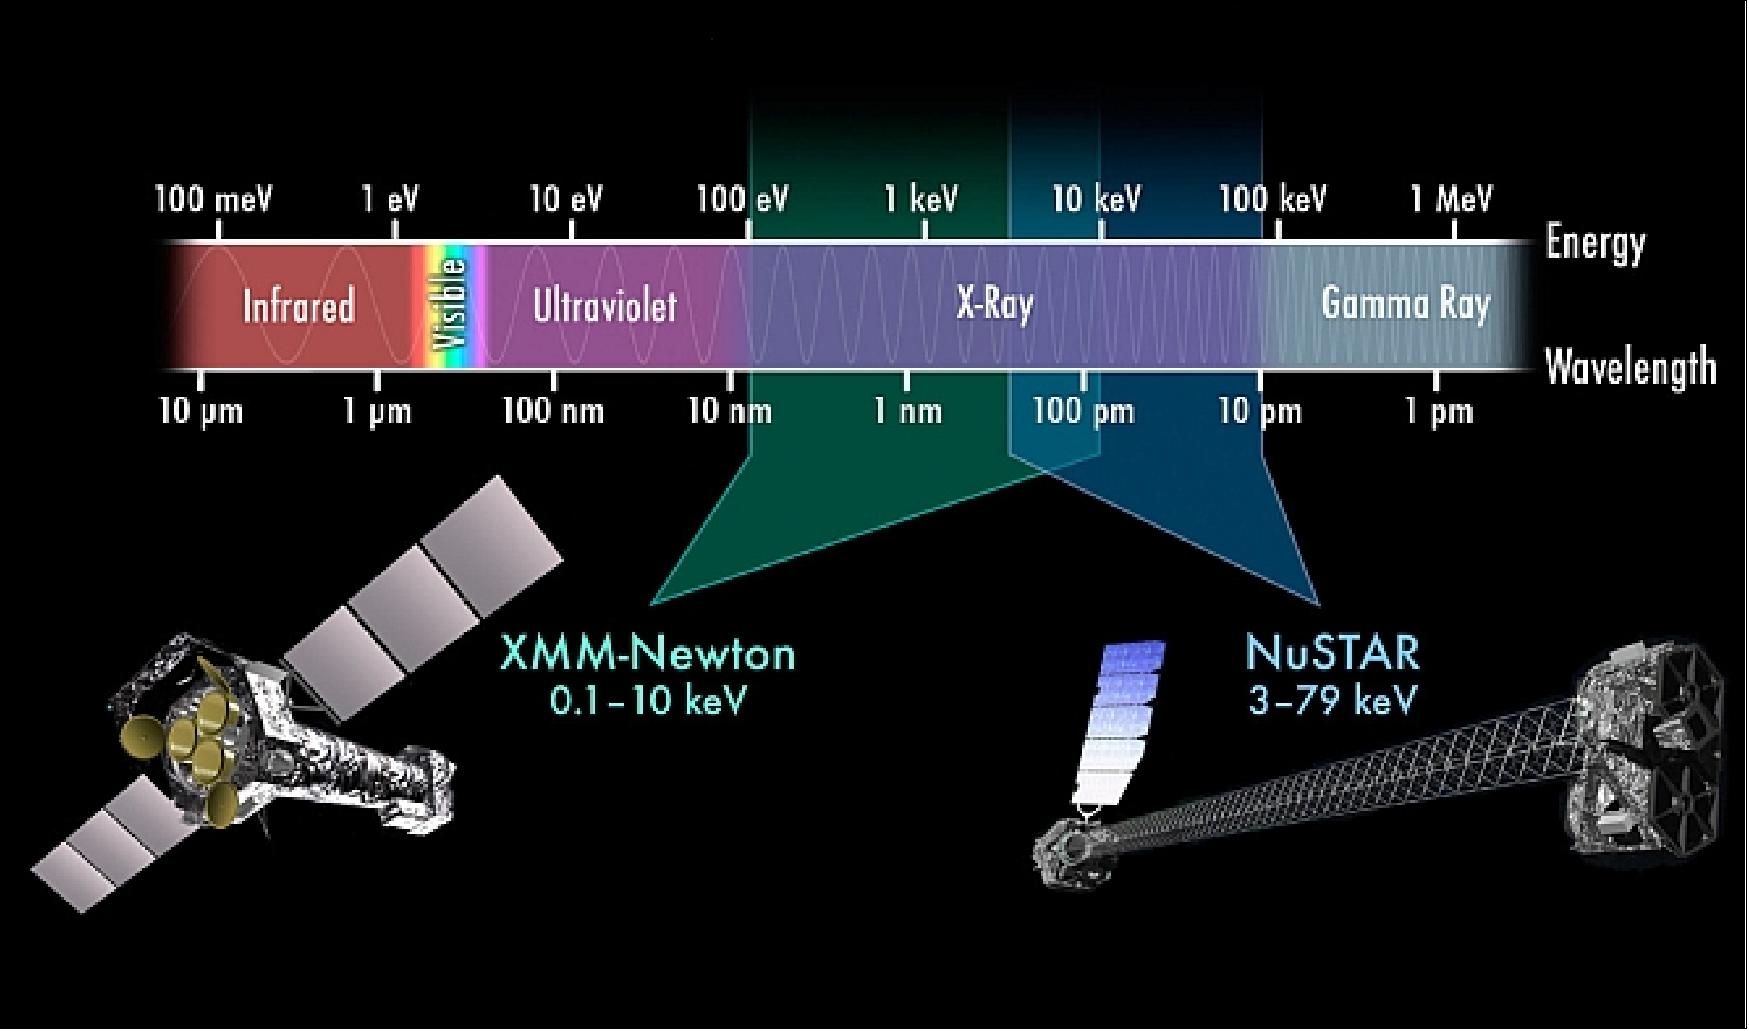 Figure 48: Two X-ray telescopes and the electromagnetic spectrum in energy and wavelength presentation (image credit: NASA/JPL, Caltech)